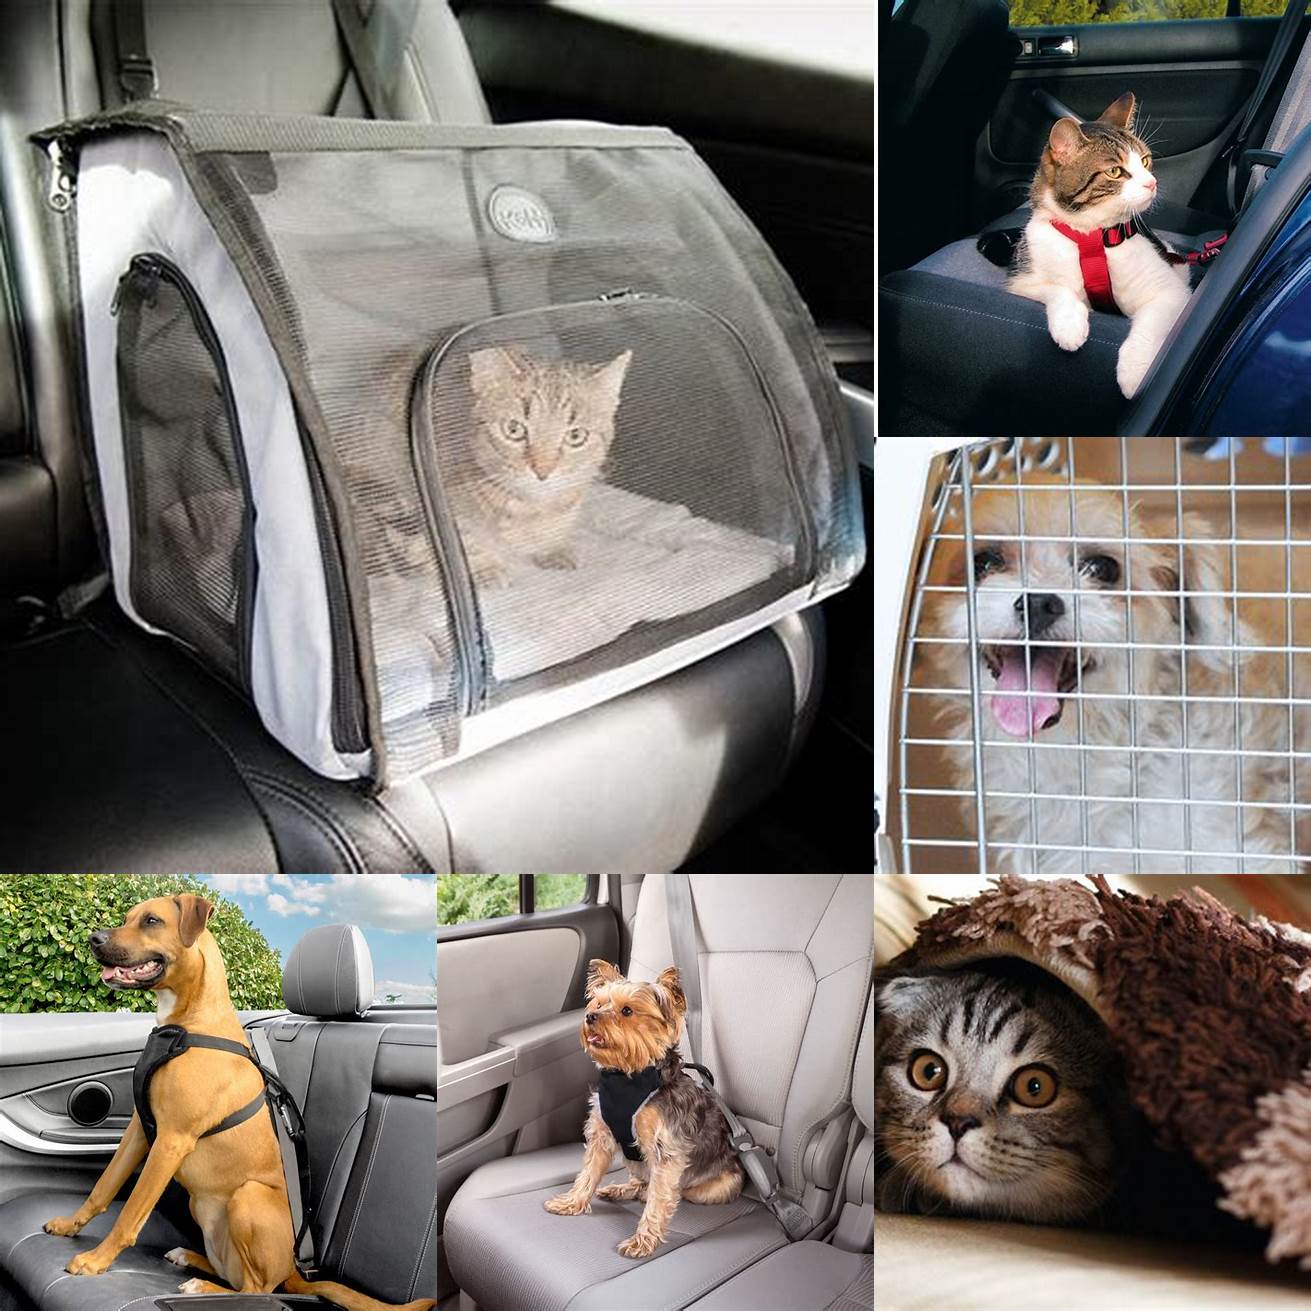 Keeps your cat safe and secure during car rides